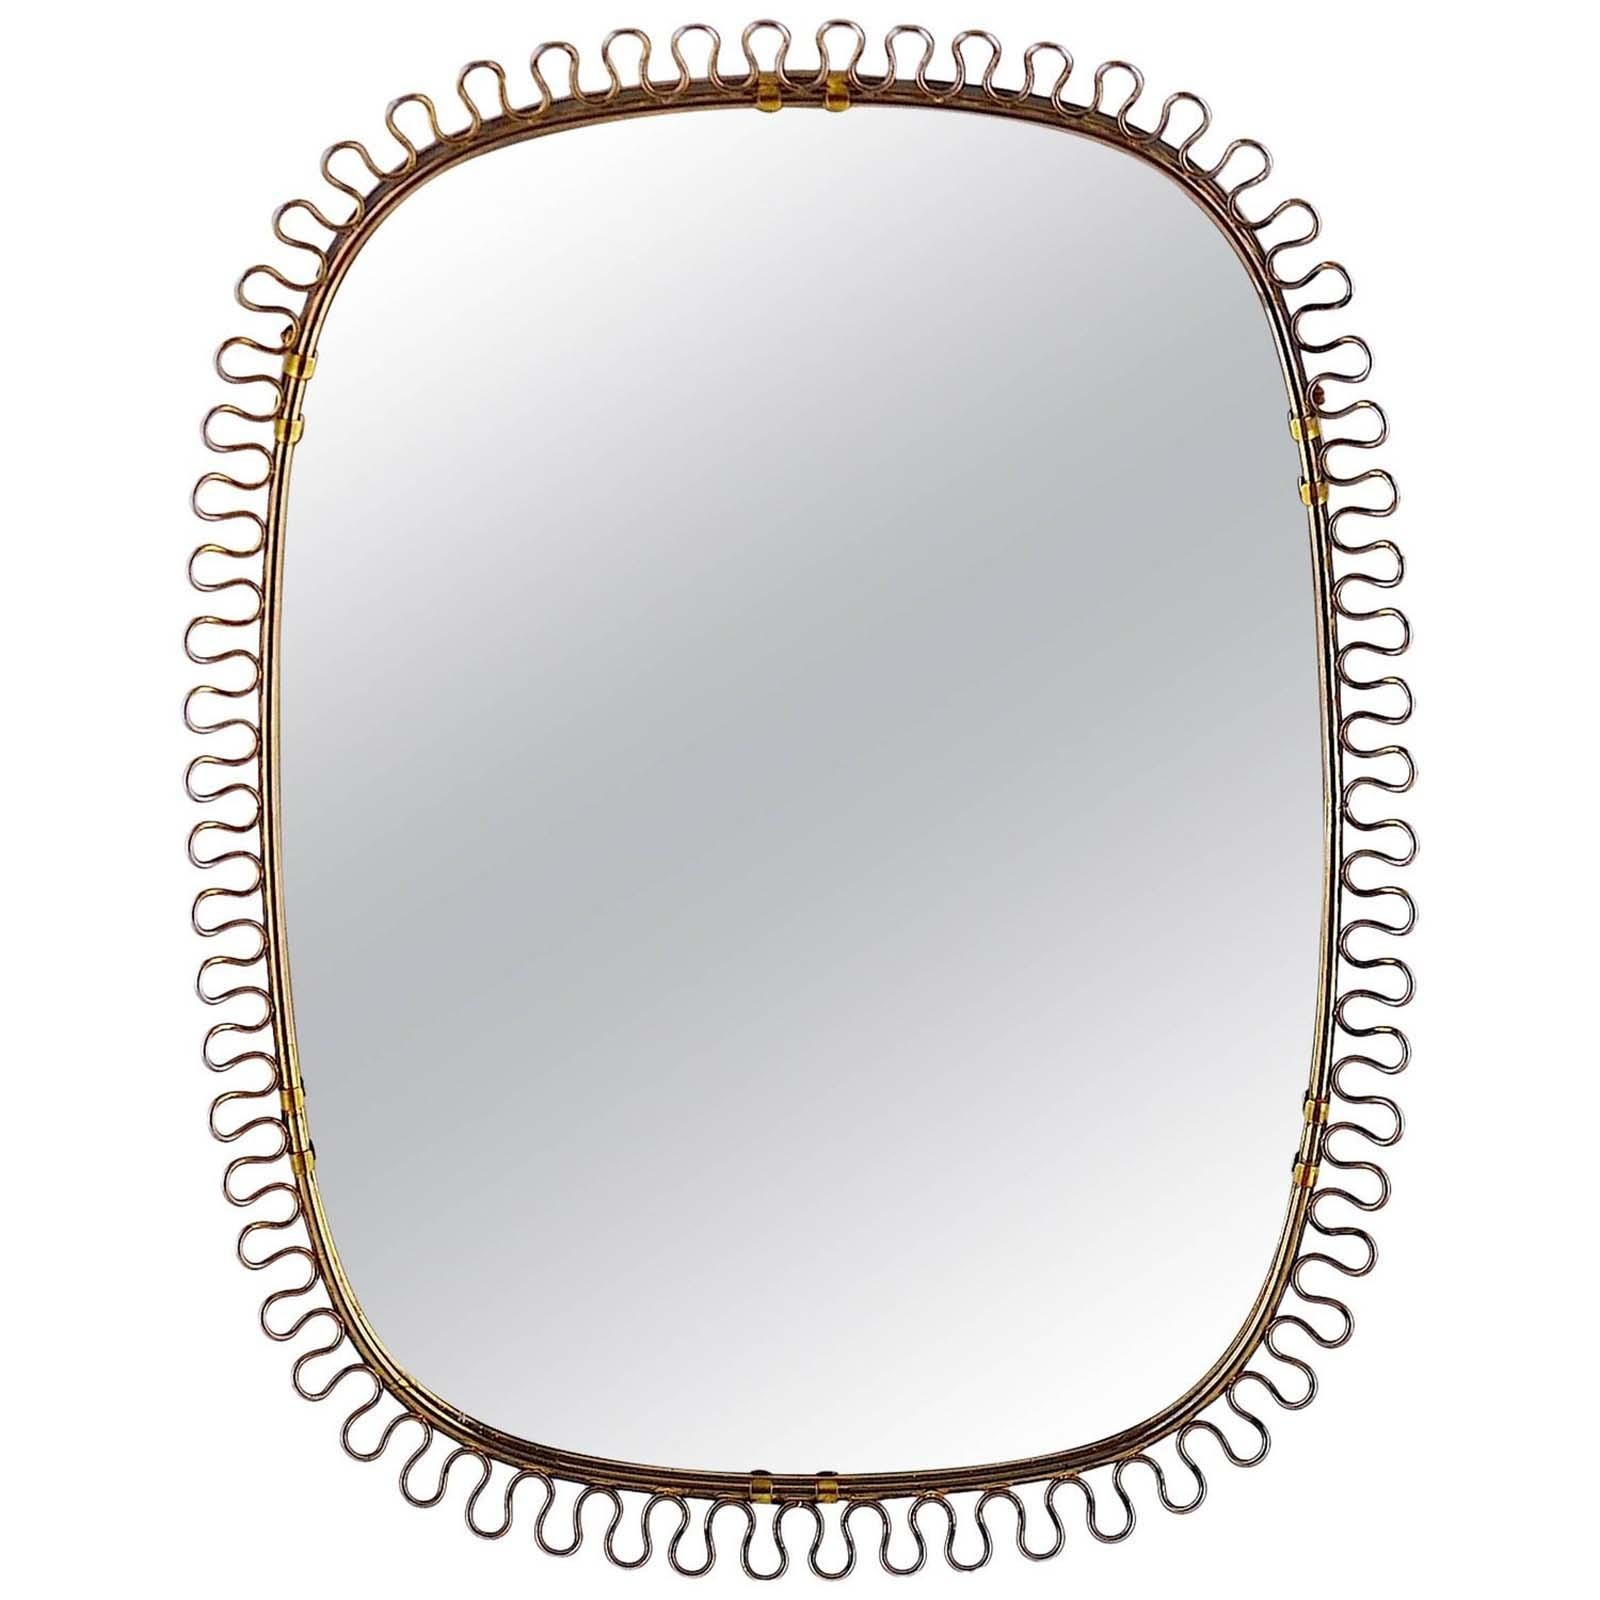 This beautiful brass loop wall mirror was designed in Sweden by Josef Frank for Svenskt Tenn in the 1950s. The brass frame with nice warm vintage patina. The original mirror glass flawless.